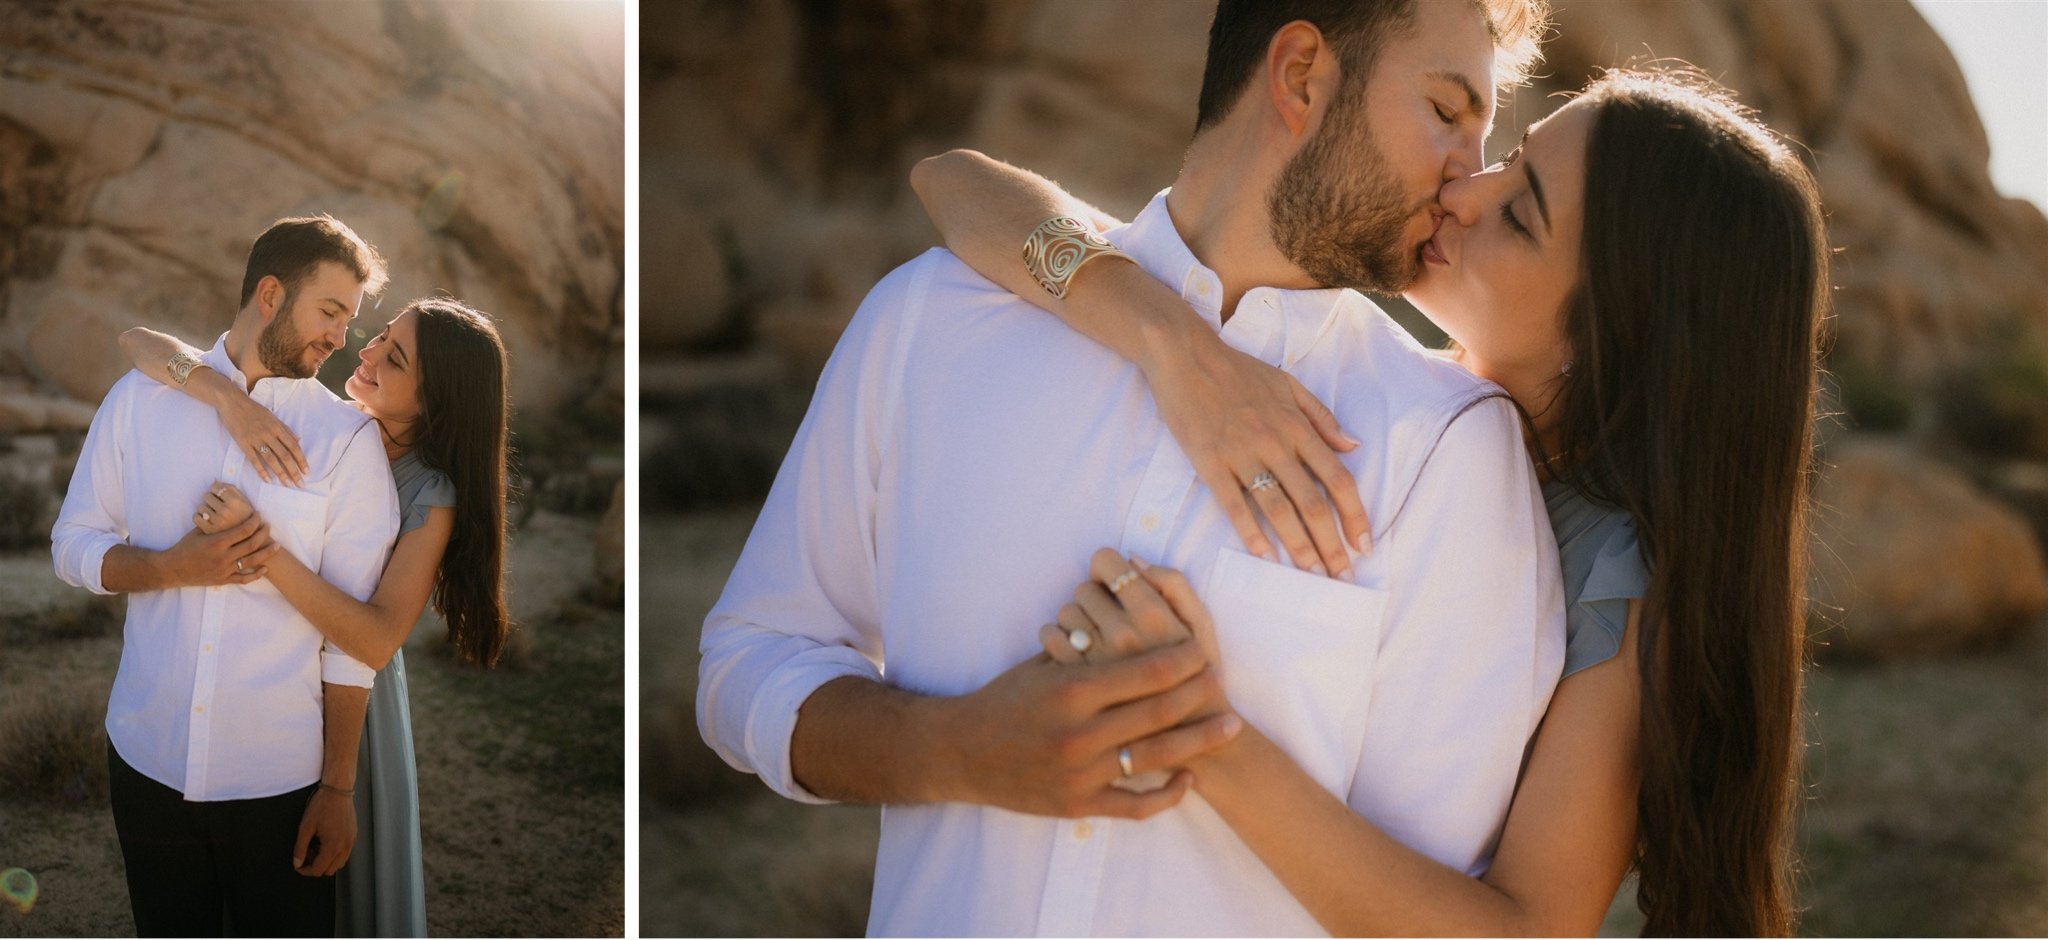 Joshua Tree Couples Session Surprise Proposal - Will Khoury Photography_25.jpg